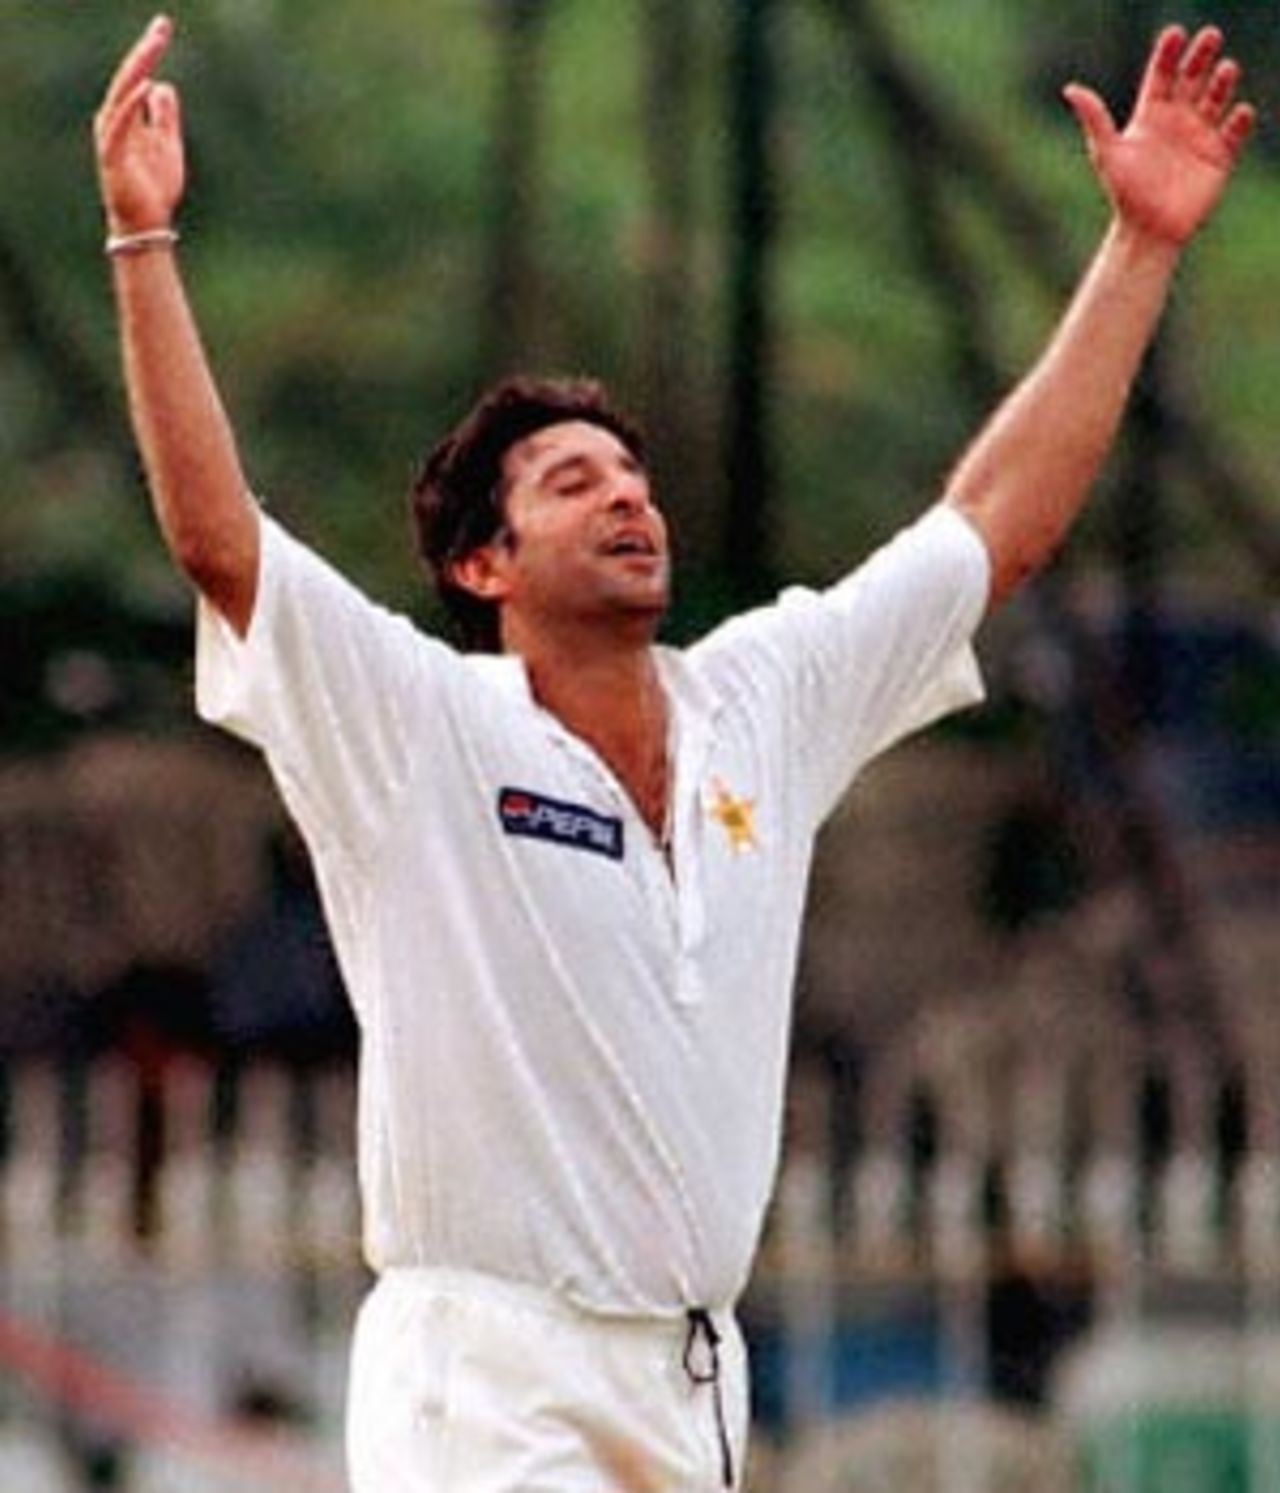 Pakistan fast bowler Wasim Akram throws is hands in the air in celebration as he took the 400th Test wicket in his test career by dismissing Sri Lanka's Russel Arnold for one in the Sri Lankan capital Colombo. Akram joined the world elite of 400 test wicket takers on the third day of the first test against Sri Lanka. Pakistan in Sri Lanka, 1999/00, 1st Test, Sri Lanka v Pakistan, Sinhalese Sports Club Ground, Colombo, 14-18 June 2000 (Day 3).